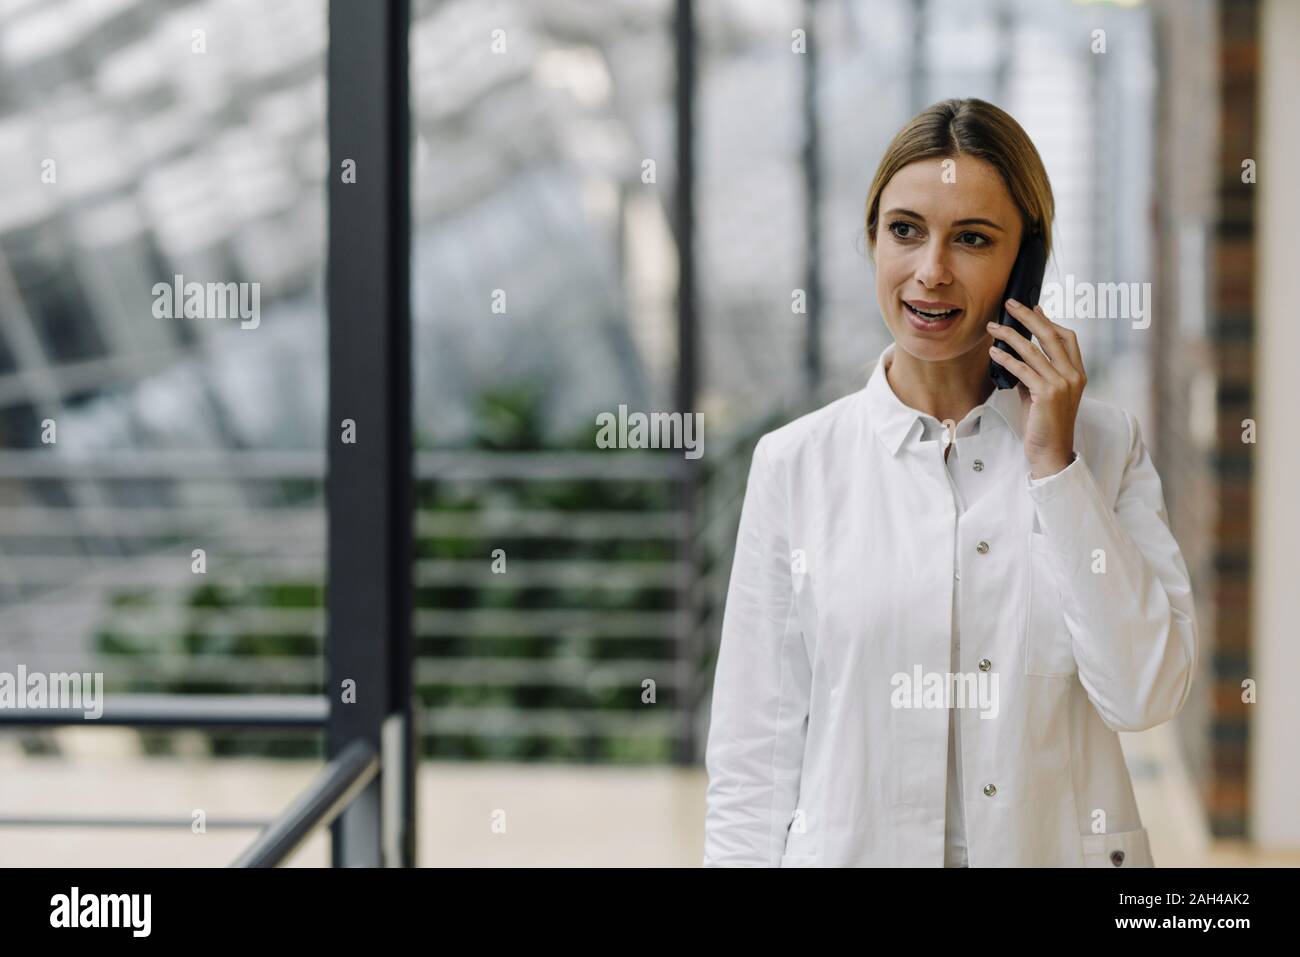 Female doctor talking on the phone Stock Photo